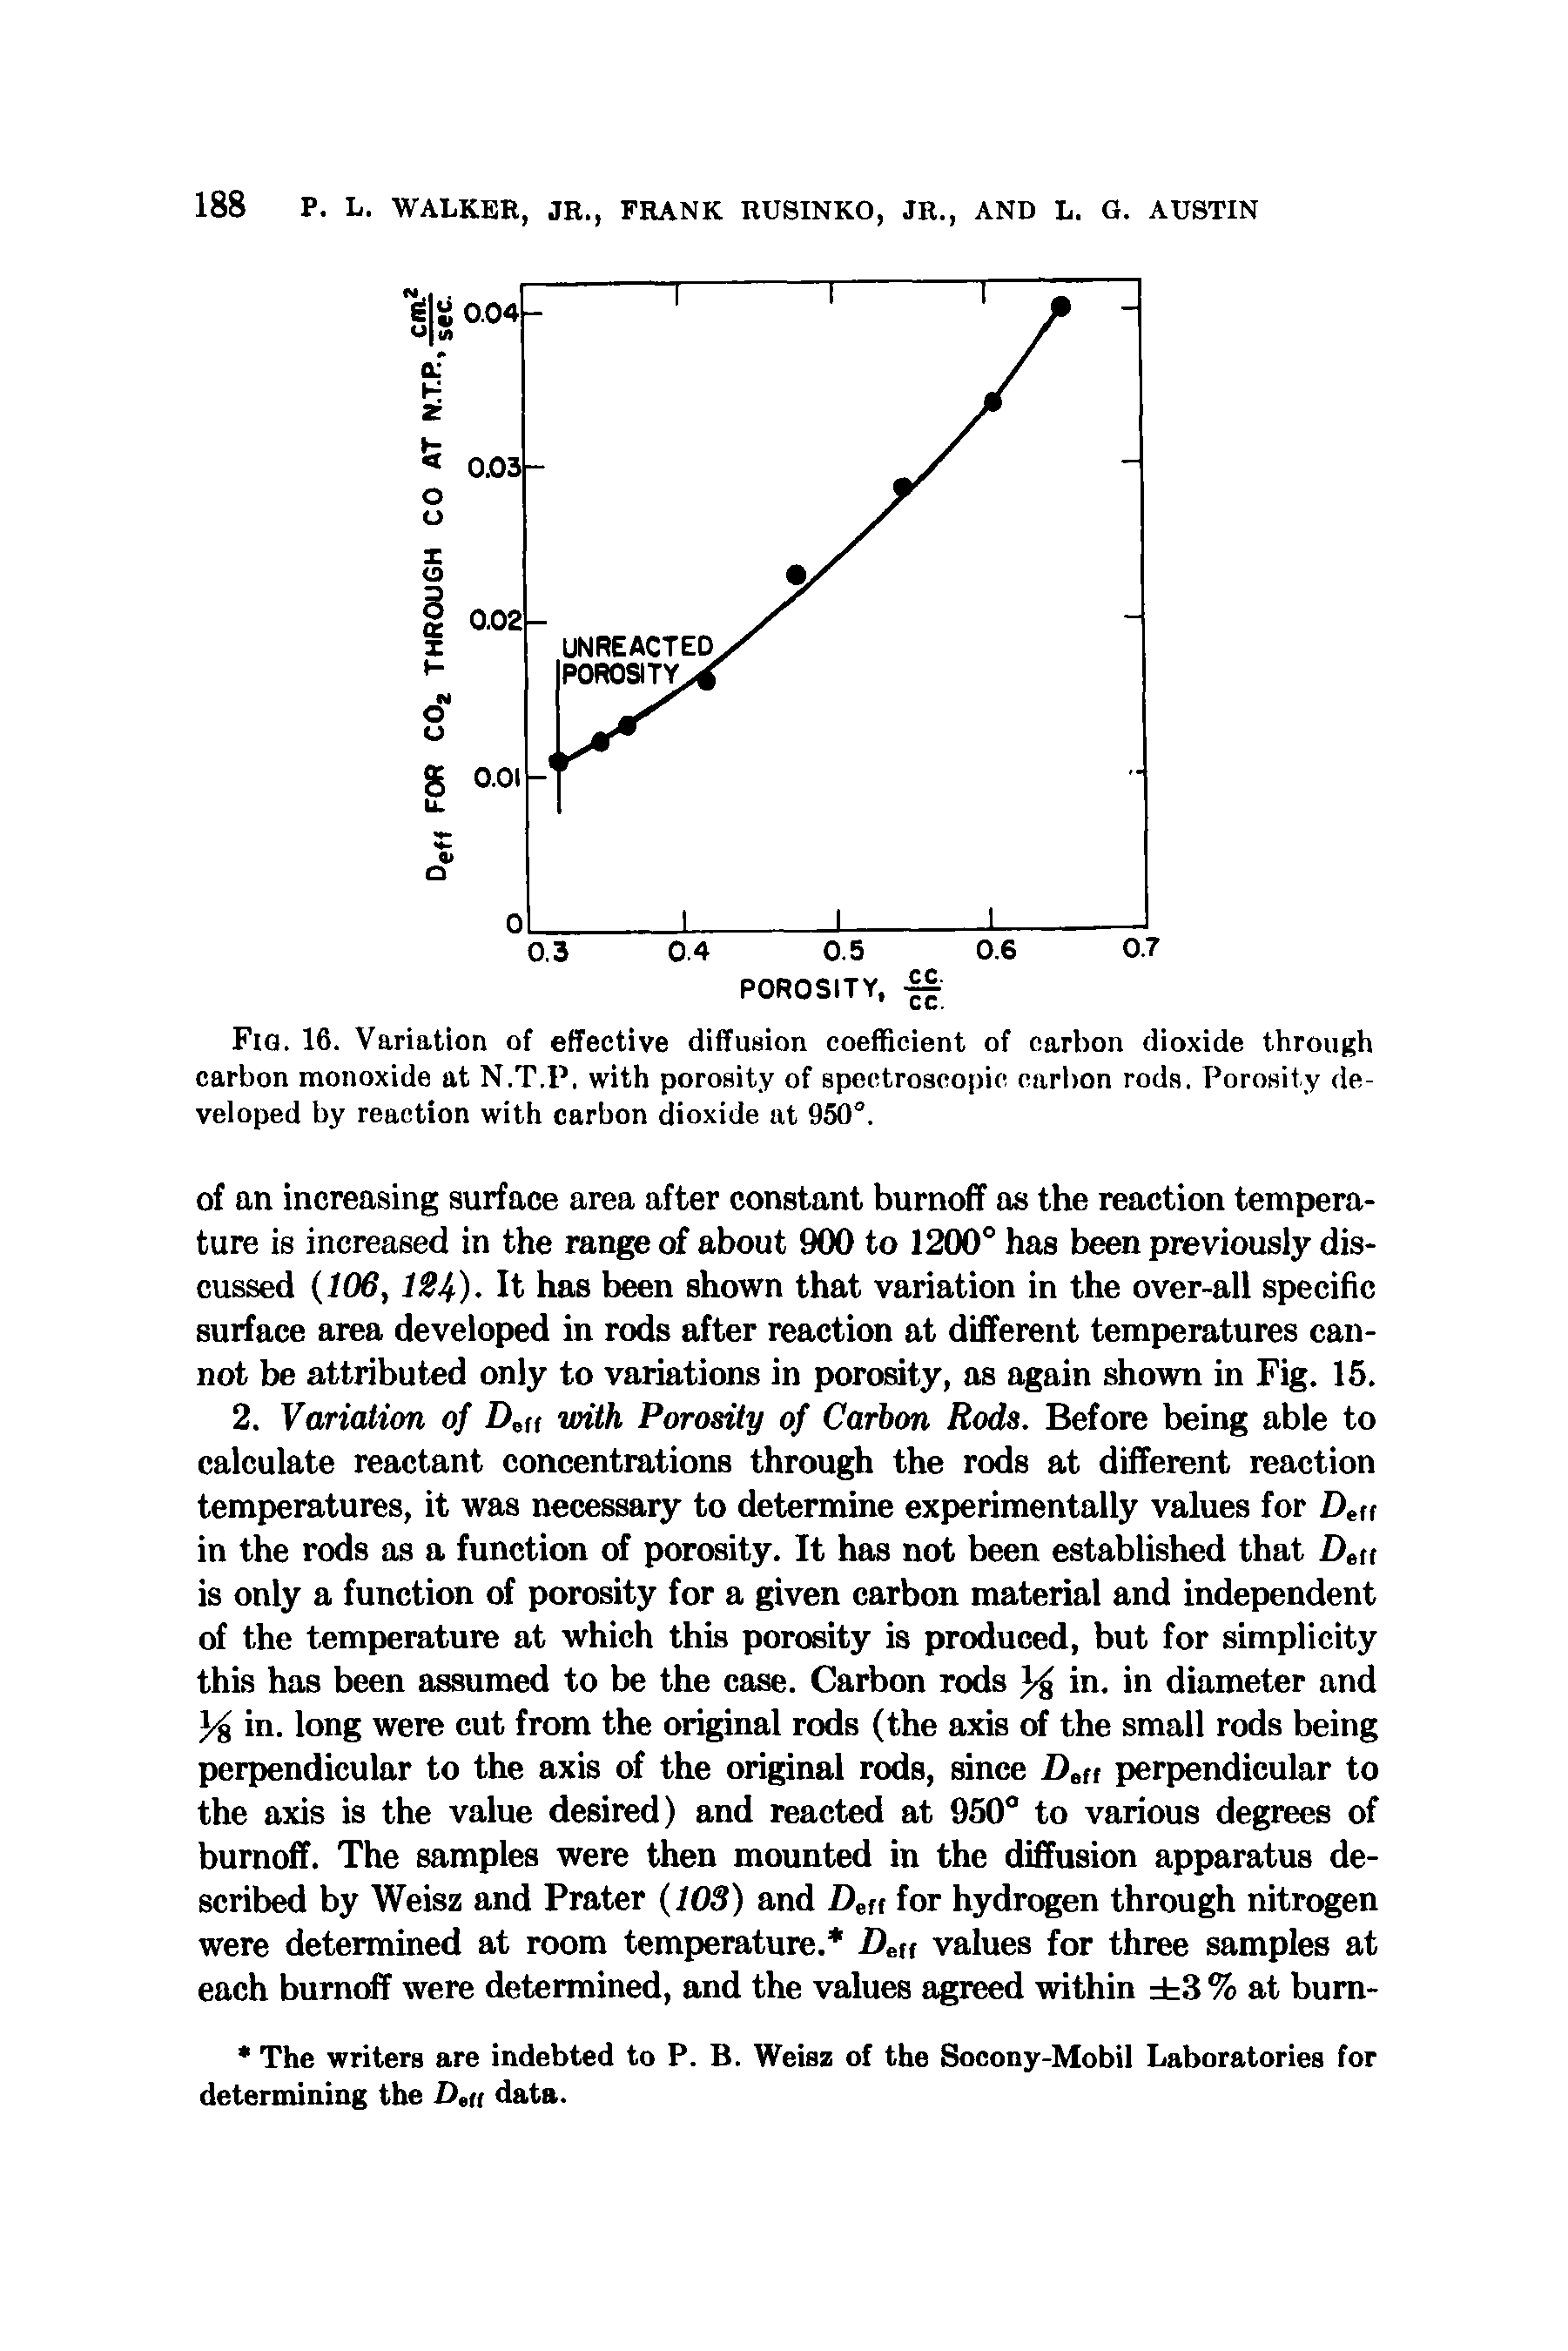 Fig. 16. Variation of effective diffusion coefficient of carbon dioxide through carbon monoxide at N.T.P. with porosity of spectroscopic carlion rods. Porosity developed by reaction with carbon dioxide at 950°.